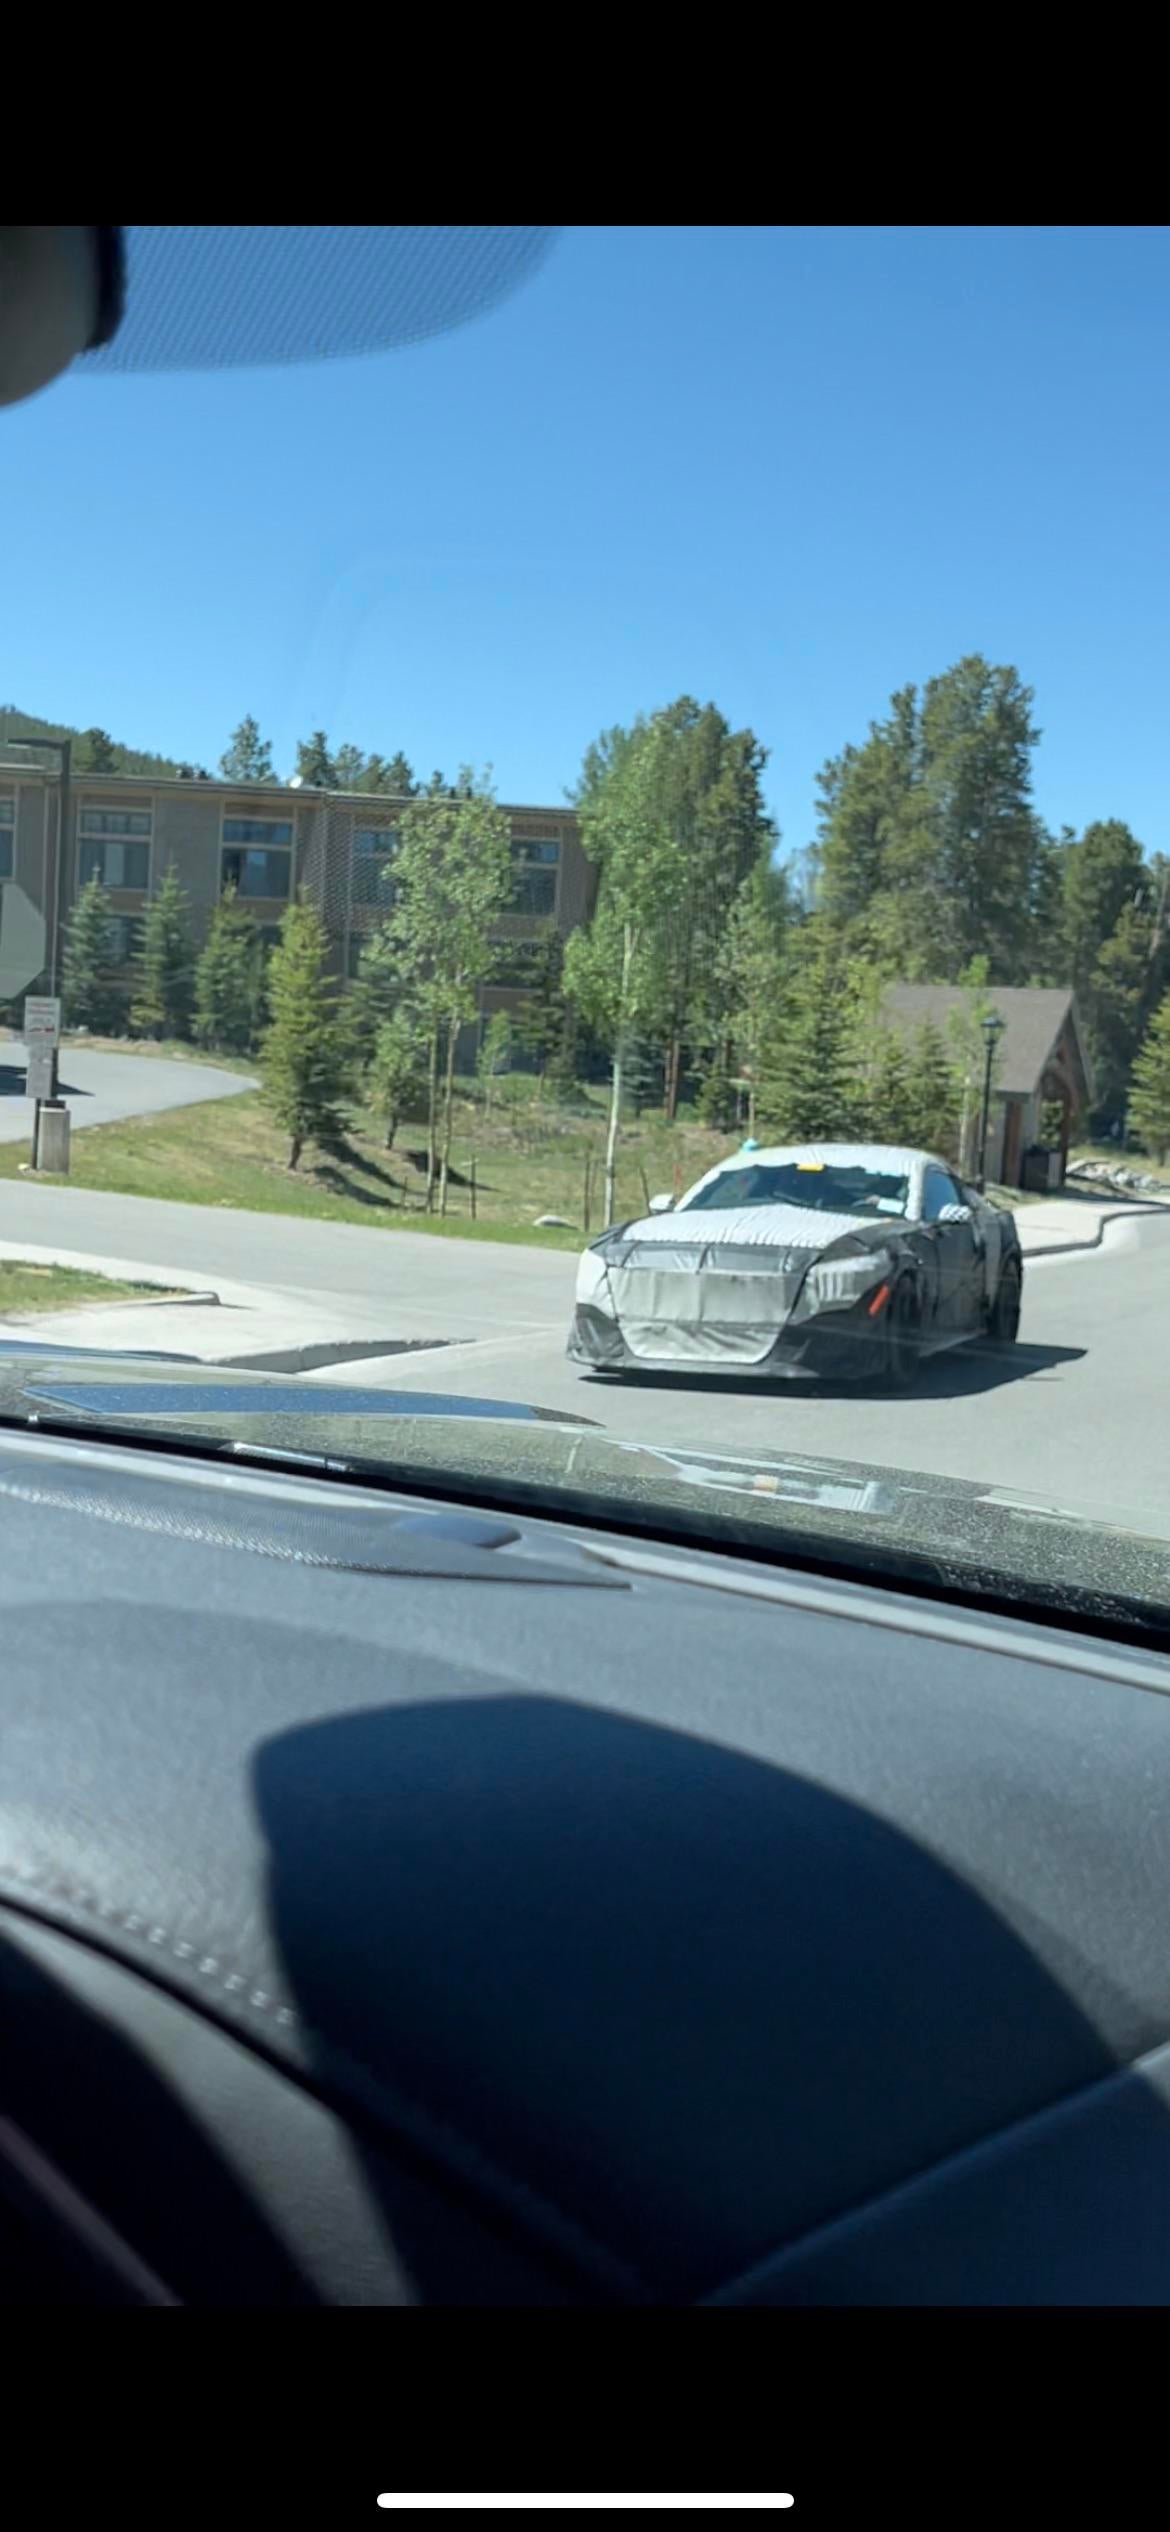 S650 Mustang New S650 Mustang test prototype shots from Frisco Colorado sighting (June 15, 2022) - Updated With Video qpbhjcuesu591